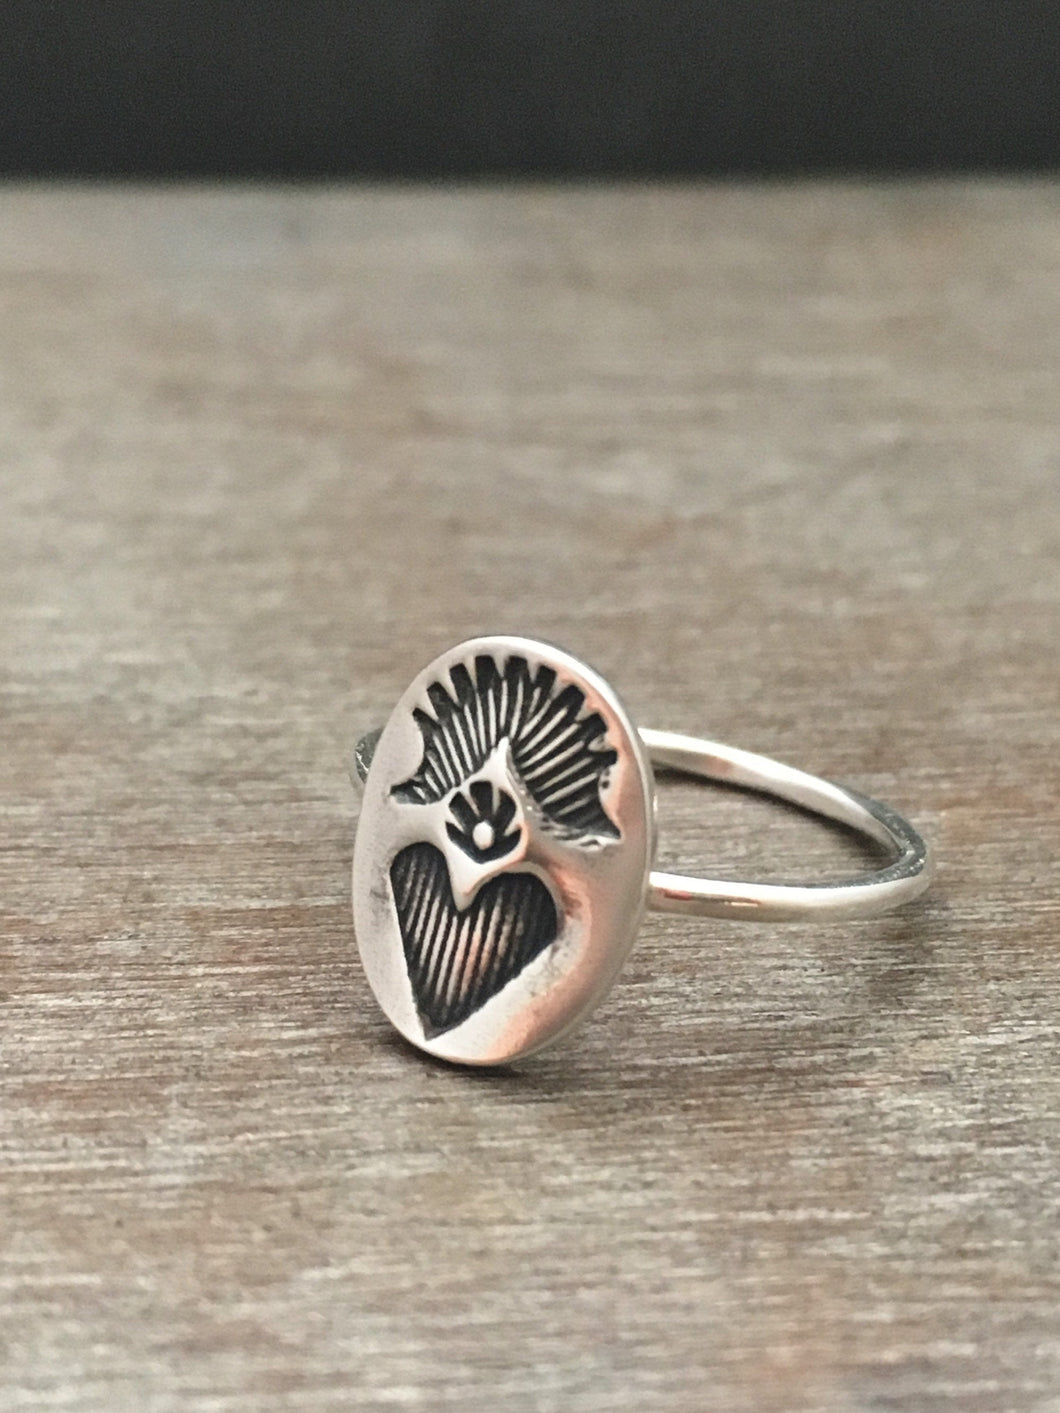 Delicate Sacred heart ring